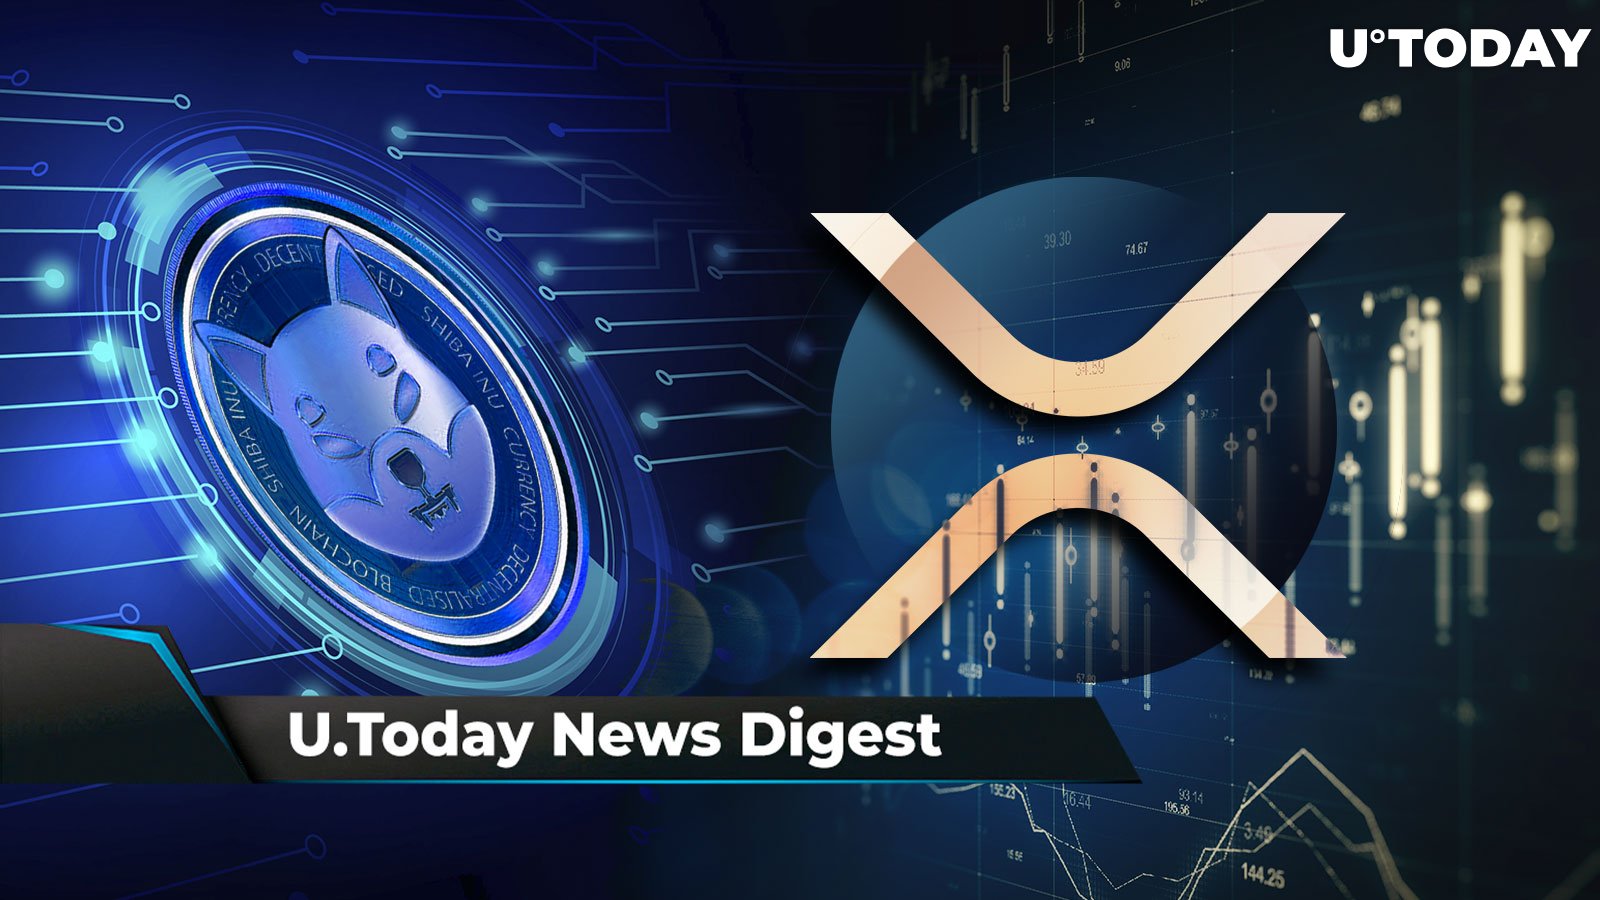 Over 1 Trillion SHIB Dumped on Turbulent Crypto Market, DOGE Trading Pair Listed by Major Exchange, Ripple's XRP Sales Soar in Q1: Crypto News Digest by U.Today